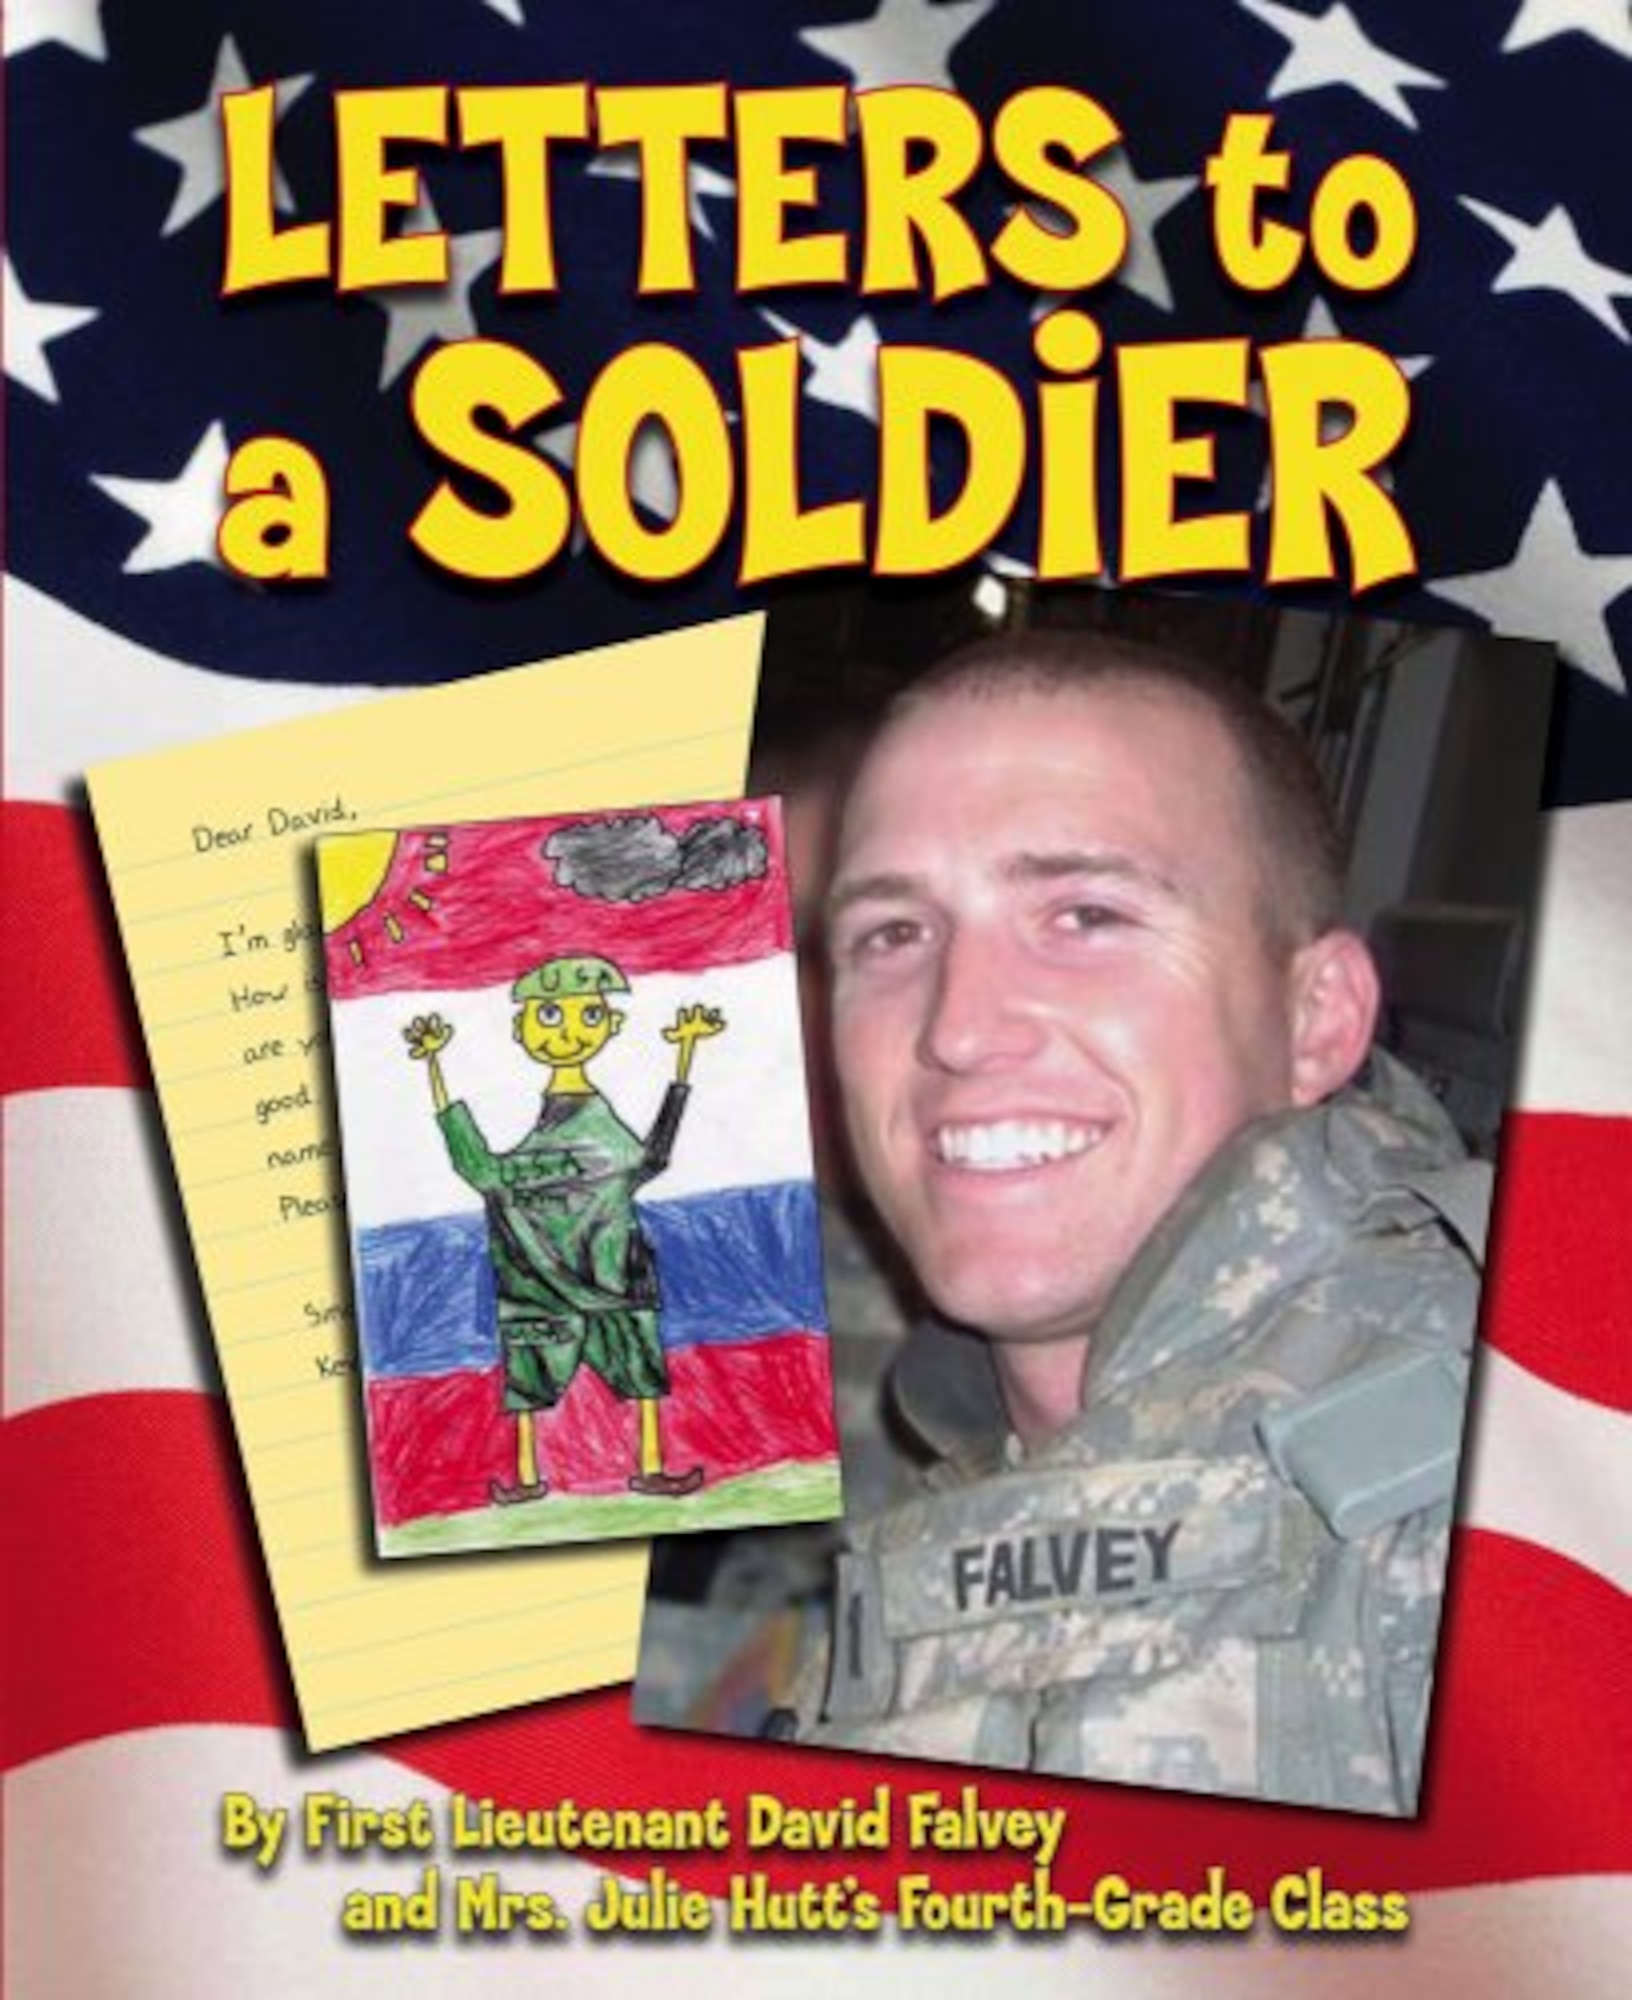 Electronic Systems Center's David Falvey carried on e-mail correspondence with a group of students during his deployment to Iraq, resulting in the recently published book 'Letters to a Soldier,' seen here.  (Courtesy image)